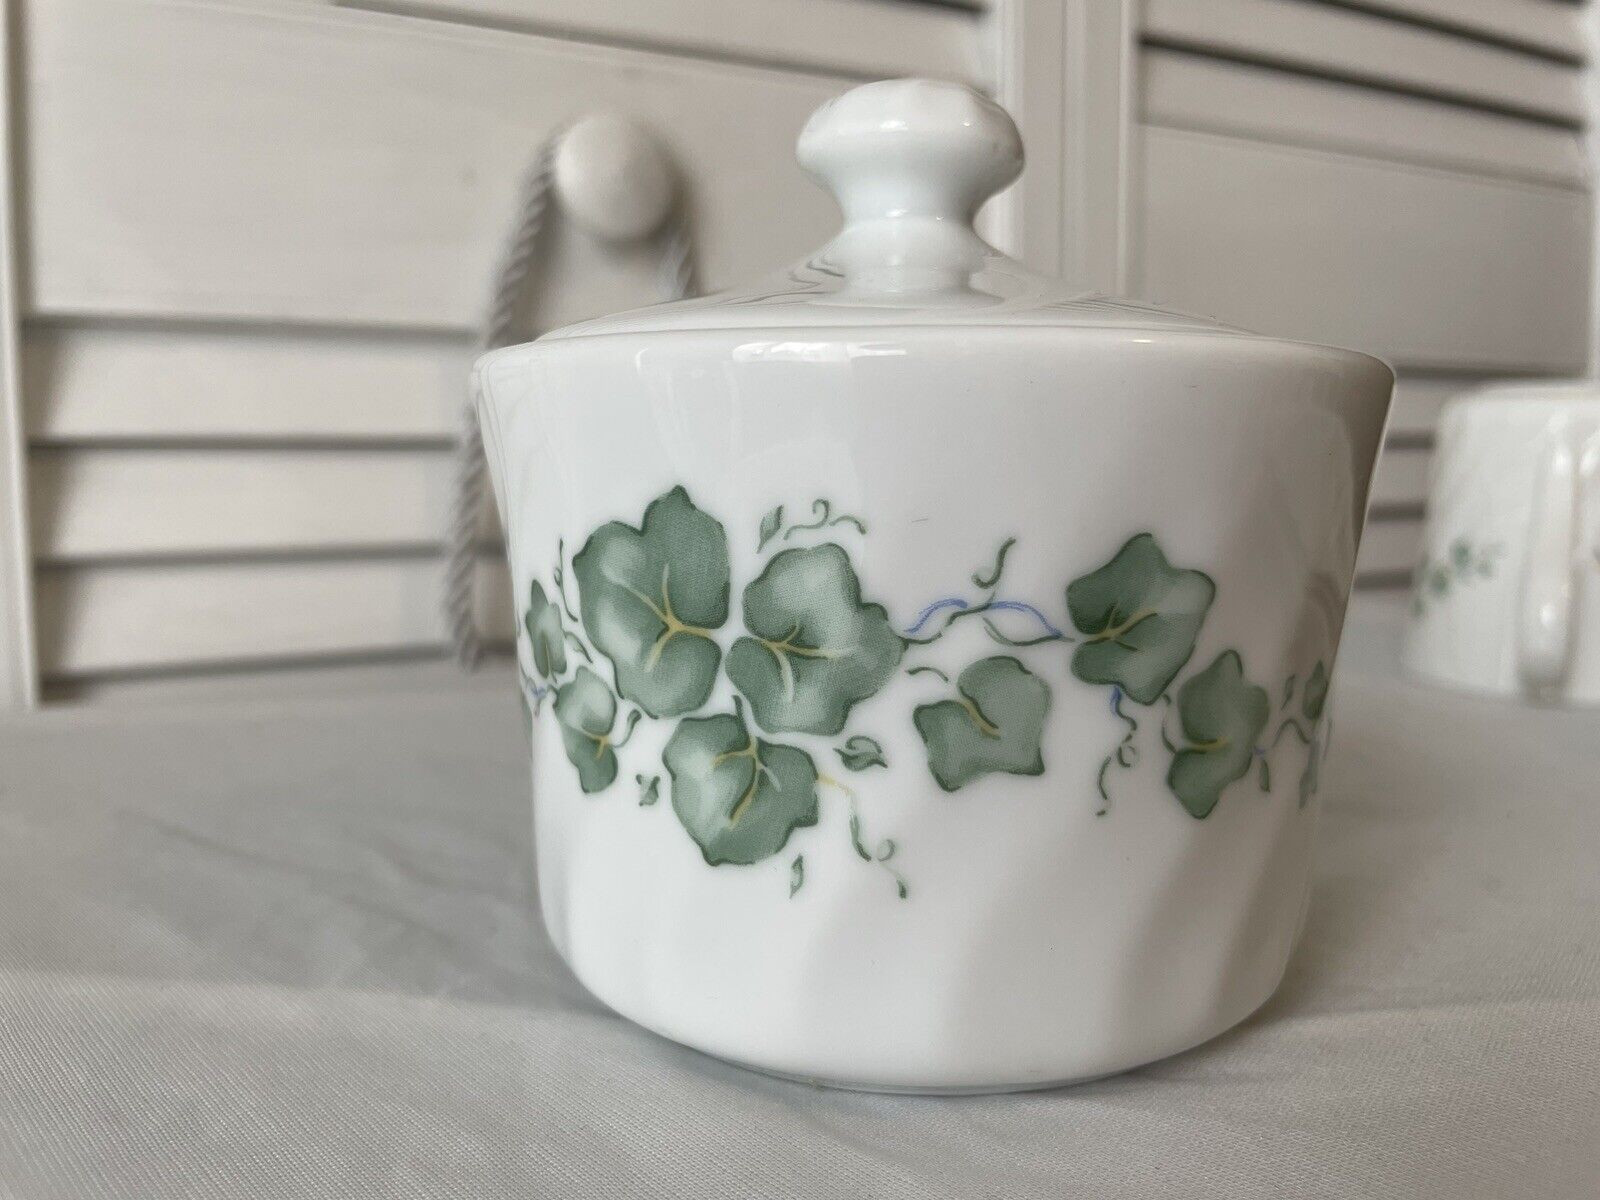 Corelle Coordinates Stoneware SUGAR BOWL Canister with Lid Callaway Ivy Vintage